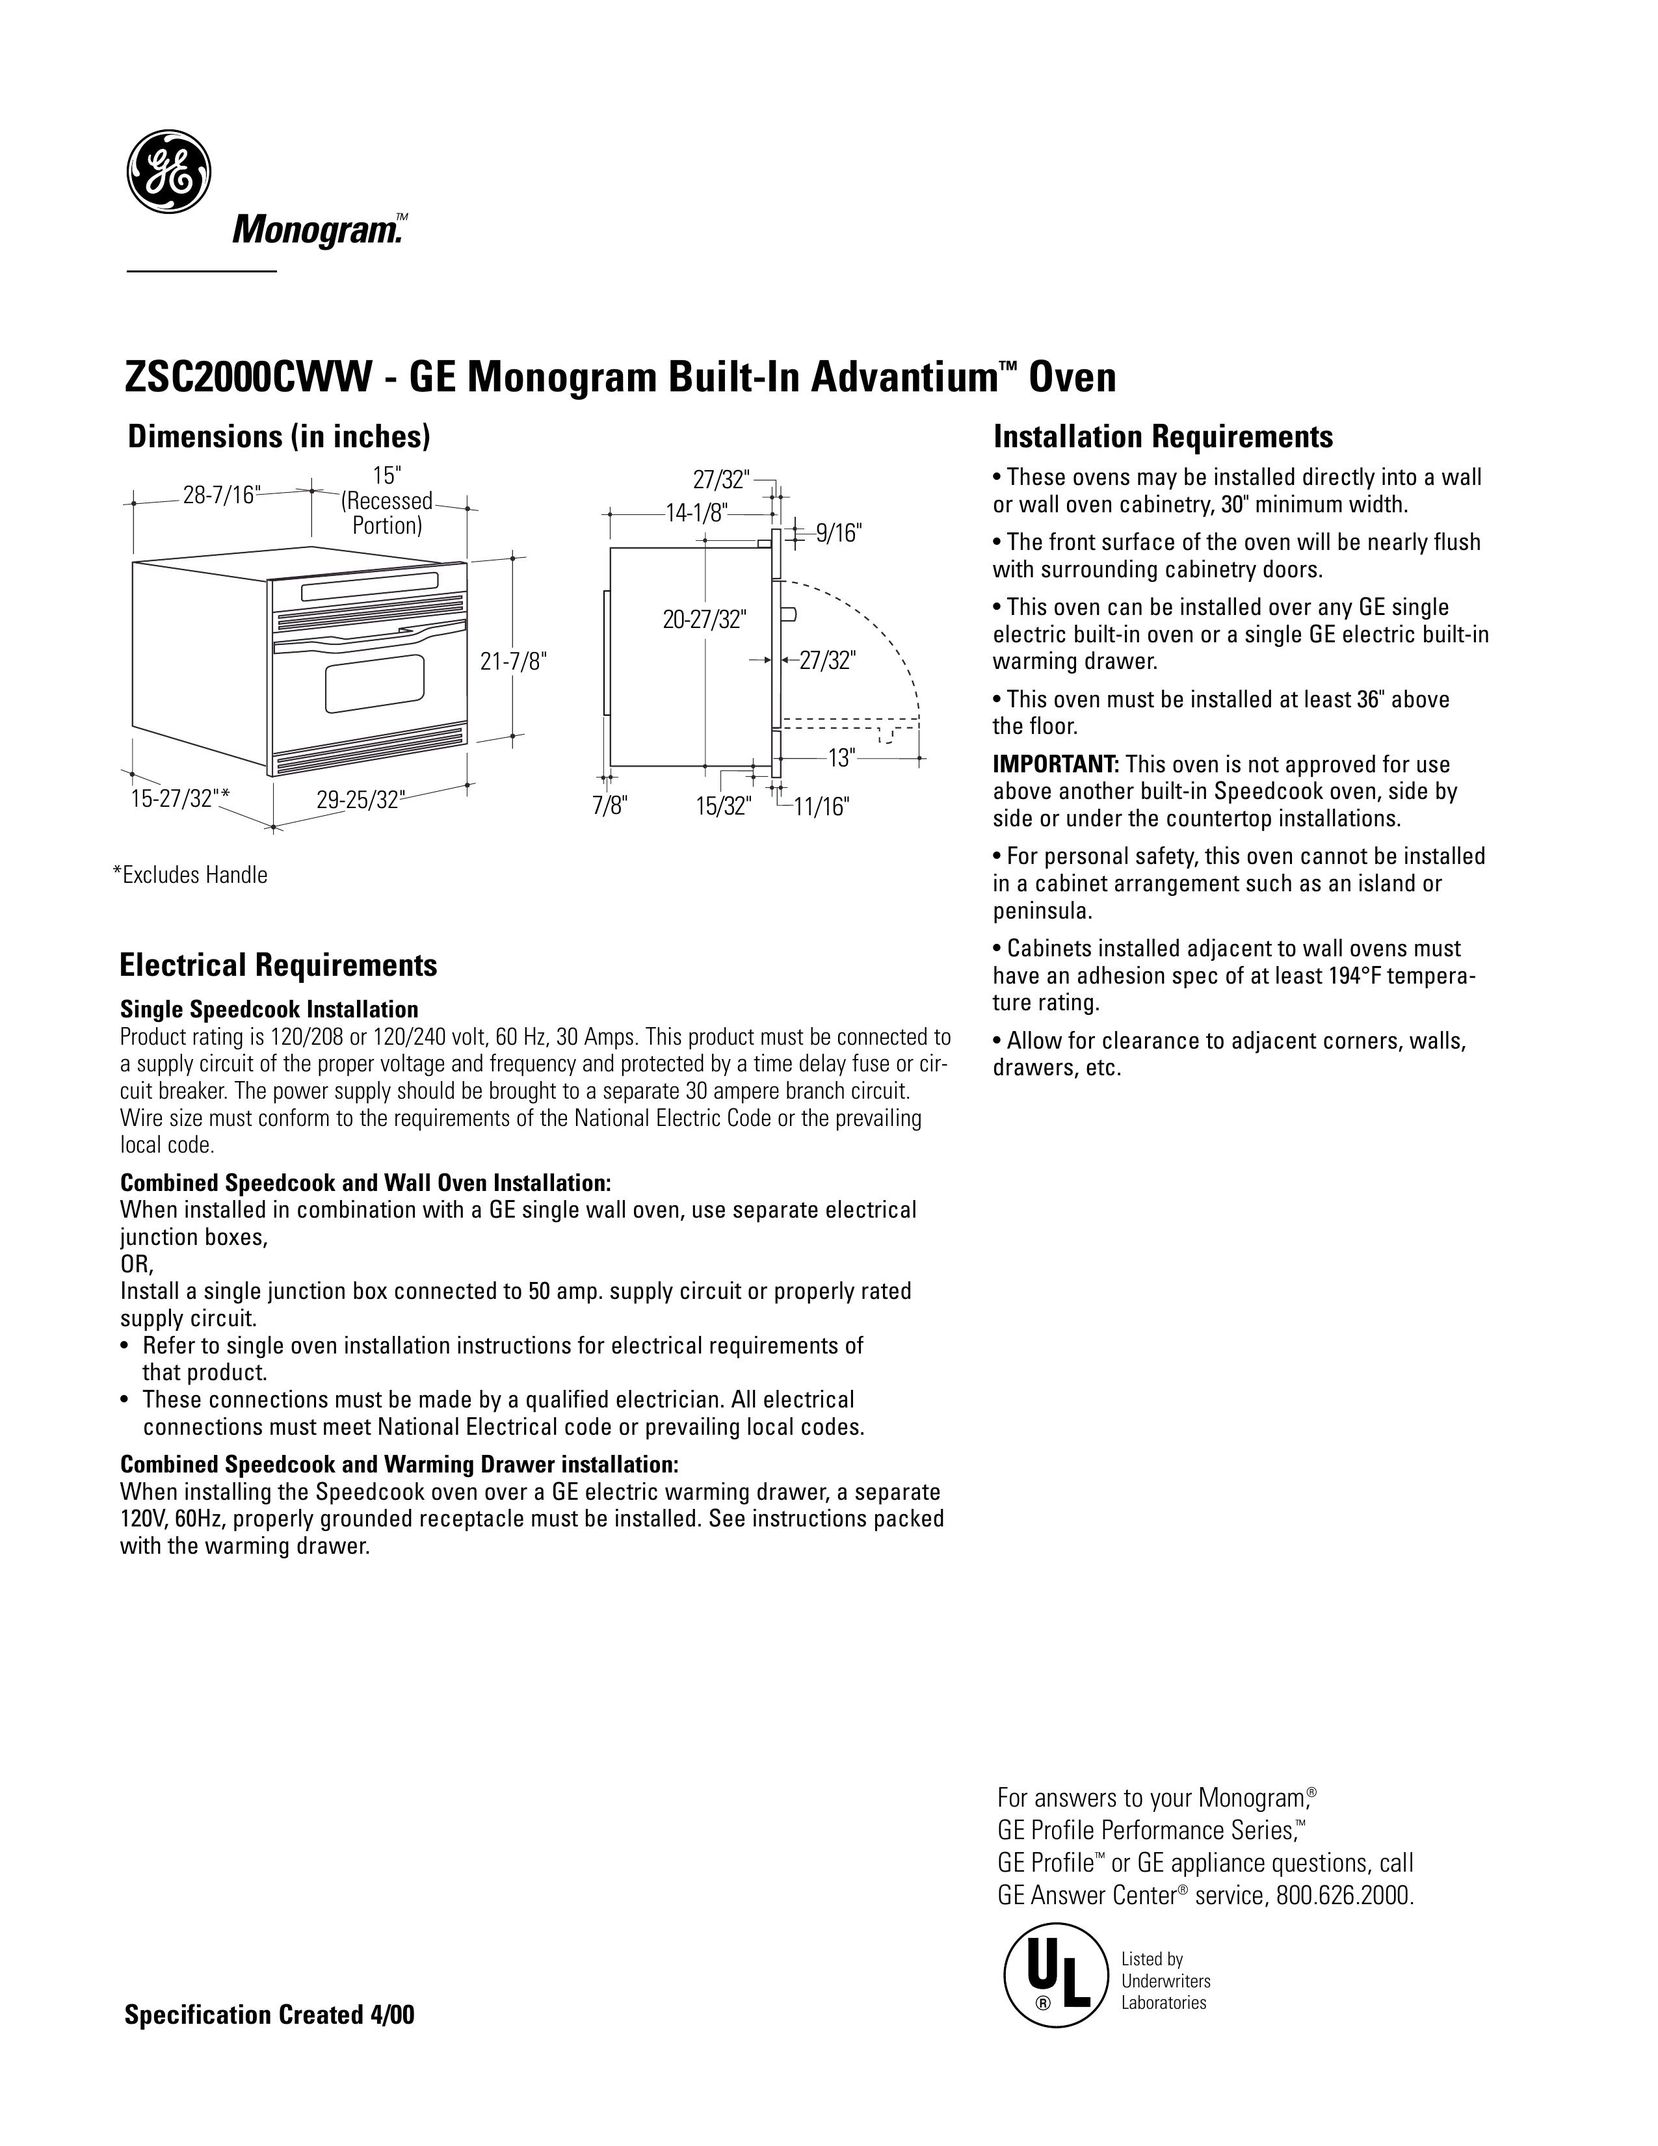 GE Monogram ZSC2000CWW Oven User Manual